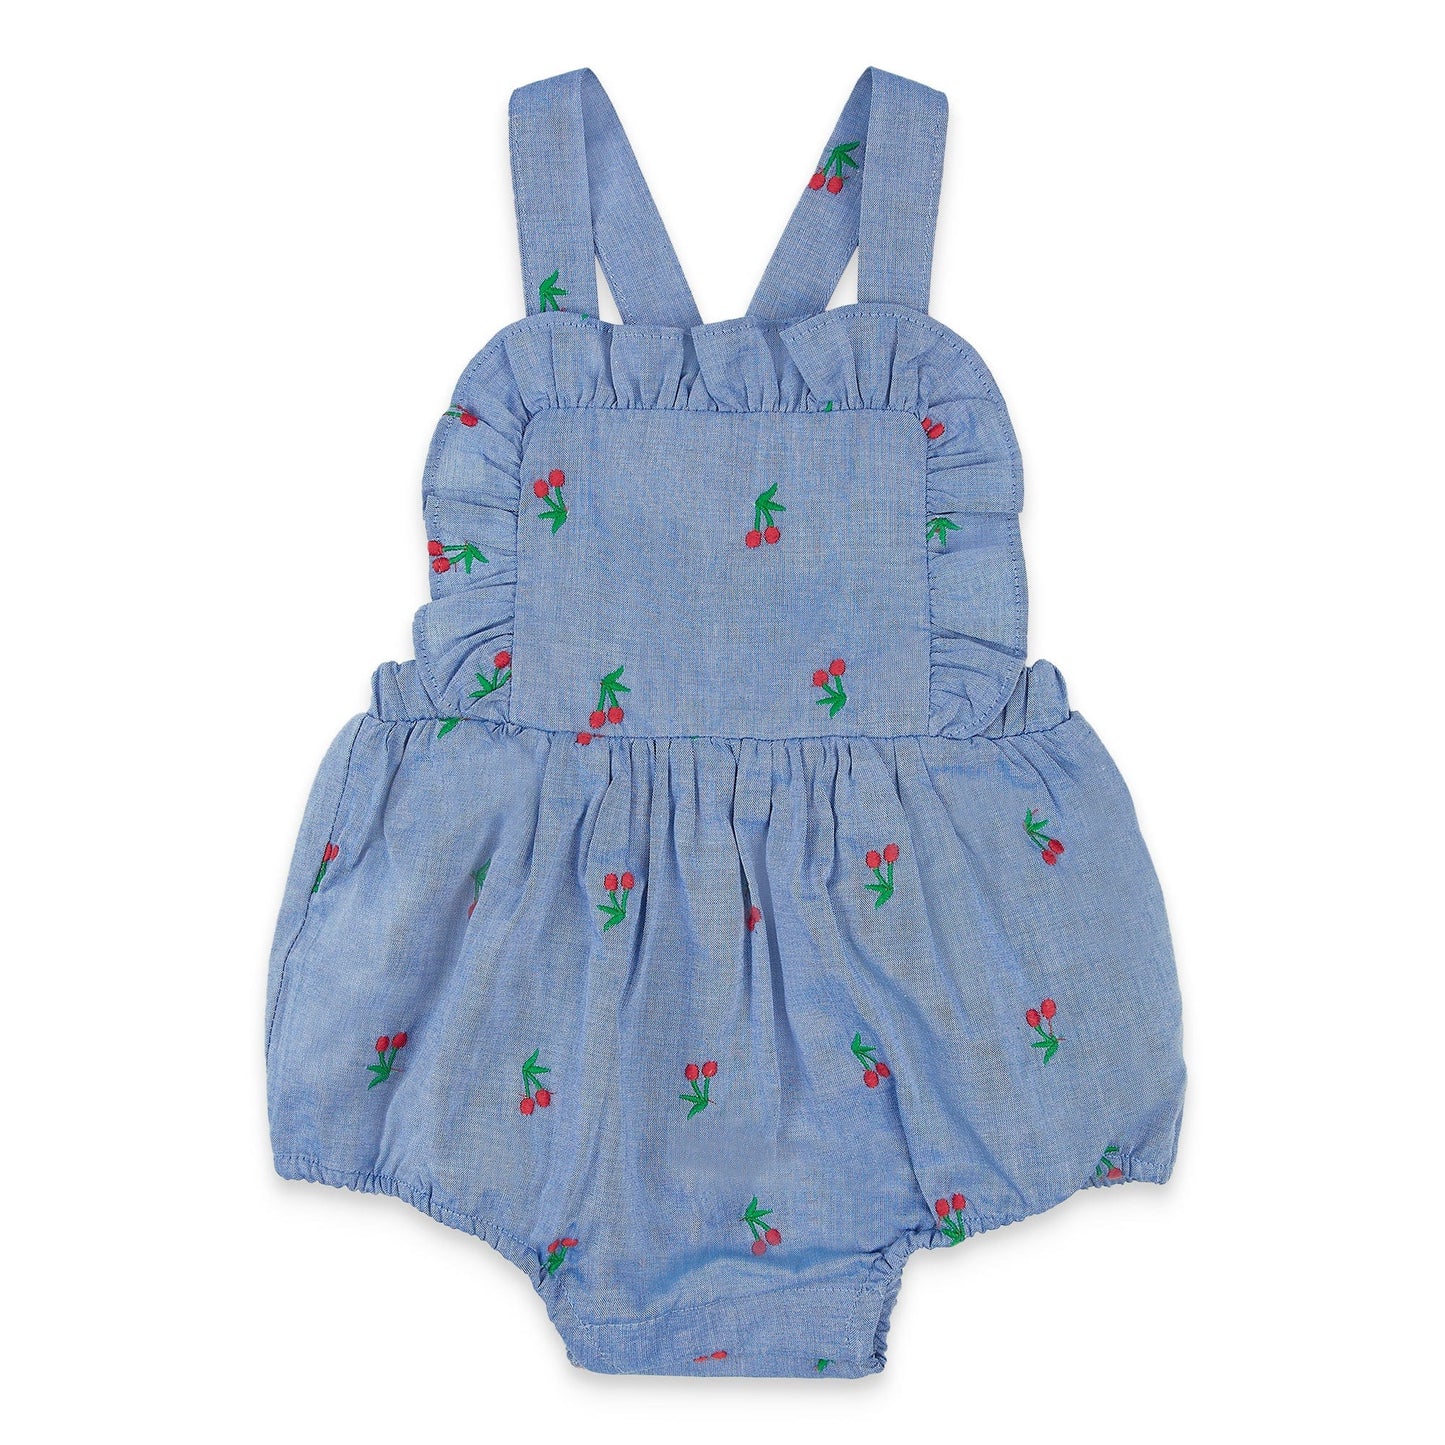 Girl Blue Onesie with Tee 3-18 Months